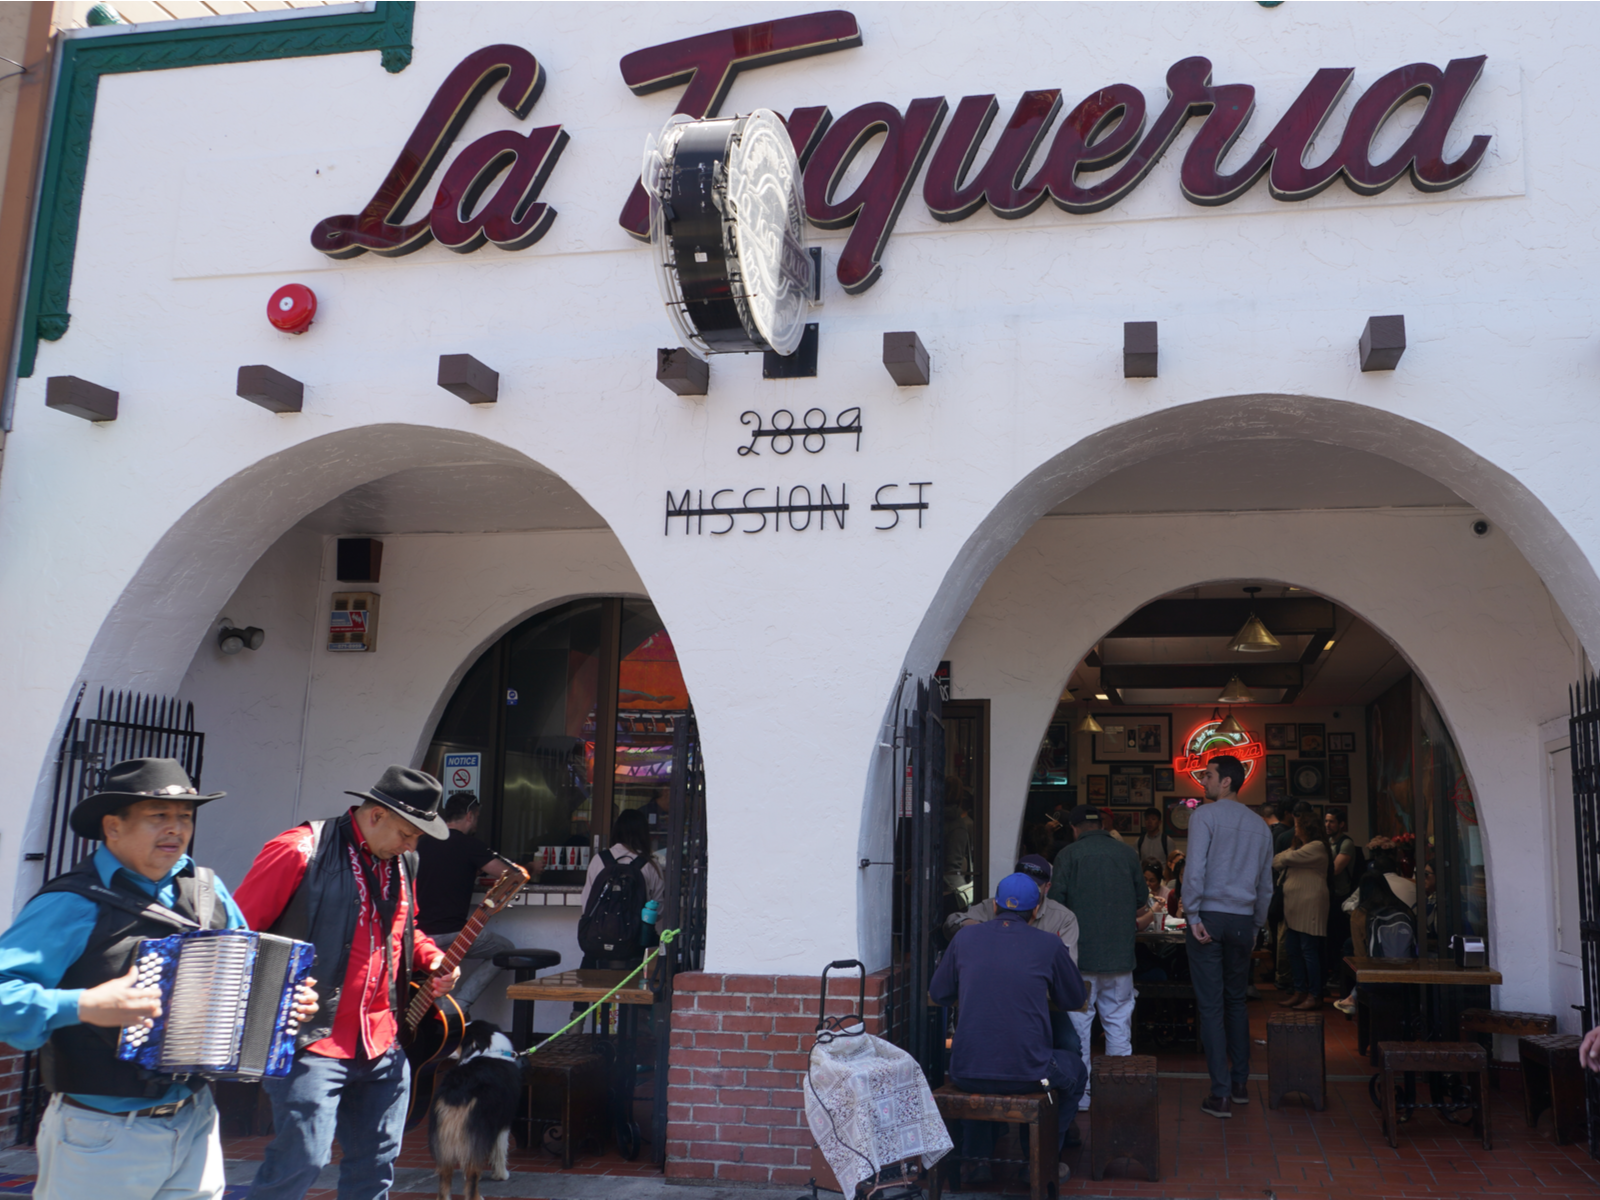 Two people carrying an Acoustic Guitar and an Accordion passing by La Taqueria filled with costumers in Mission District, known to make the best Burritos and one of the best places to visit in San Francisco